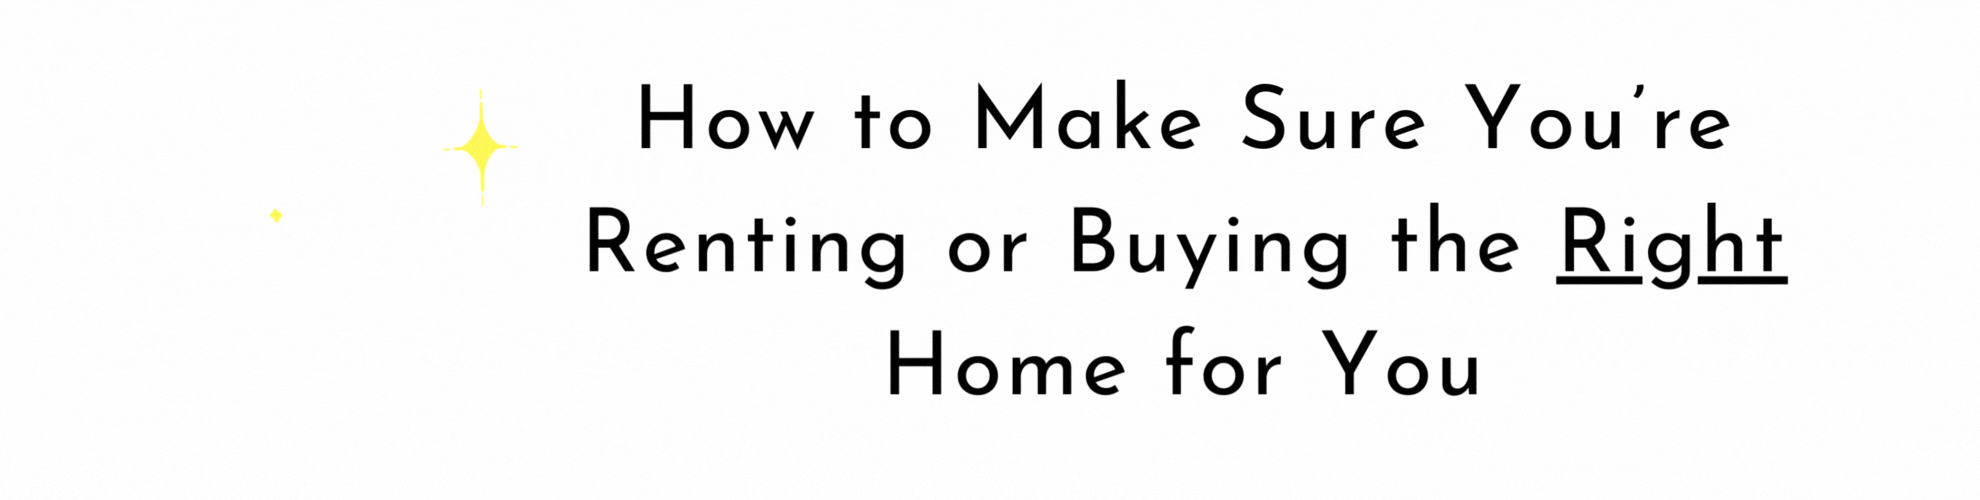 How to Make Sure You’re Renting or Buying the Right Home for You